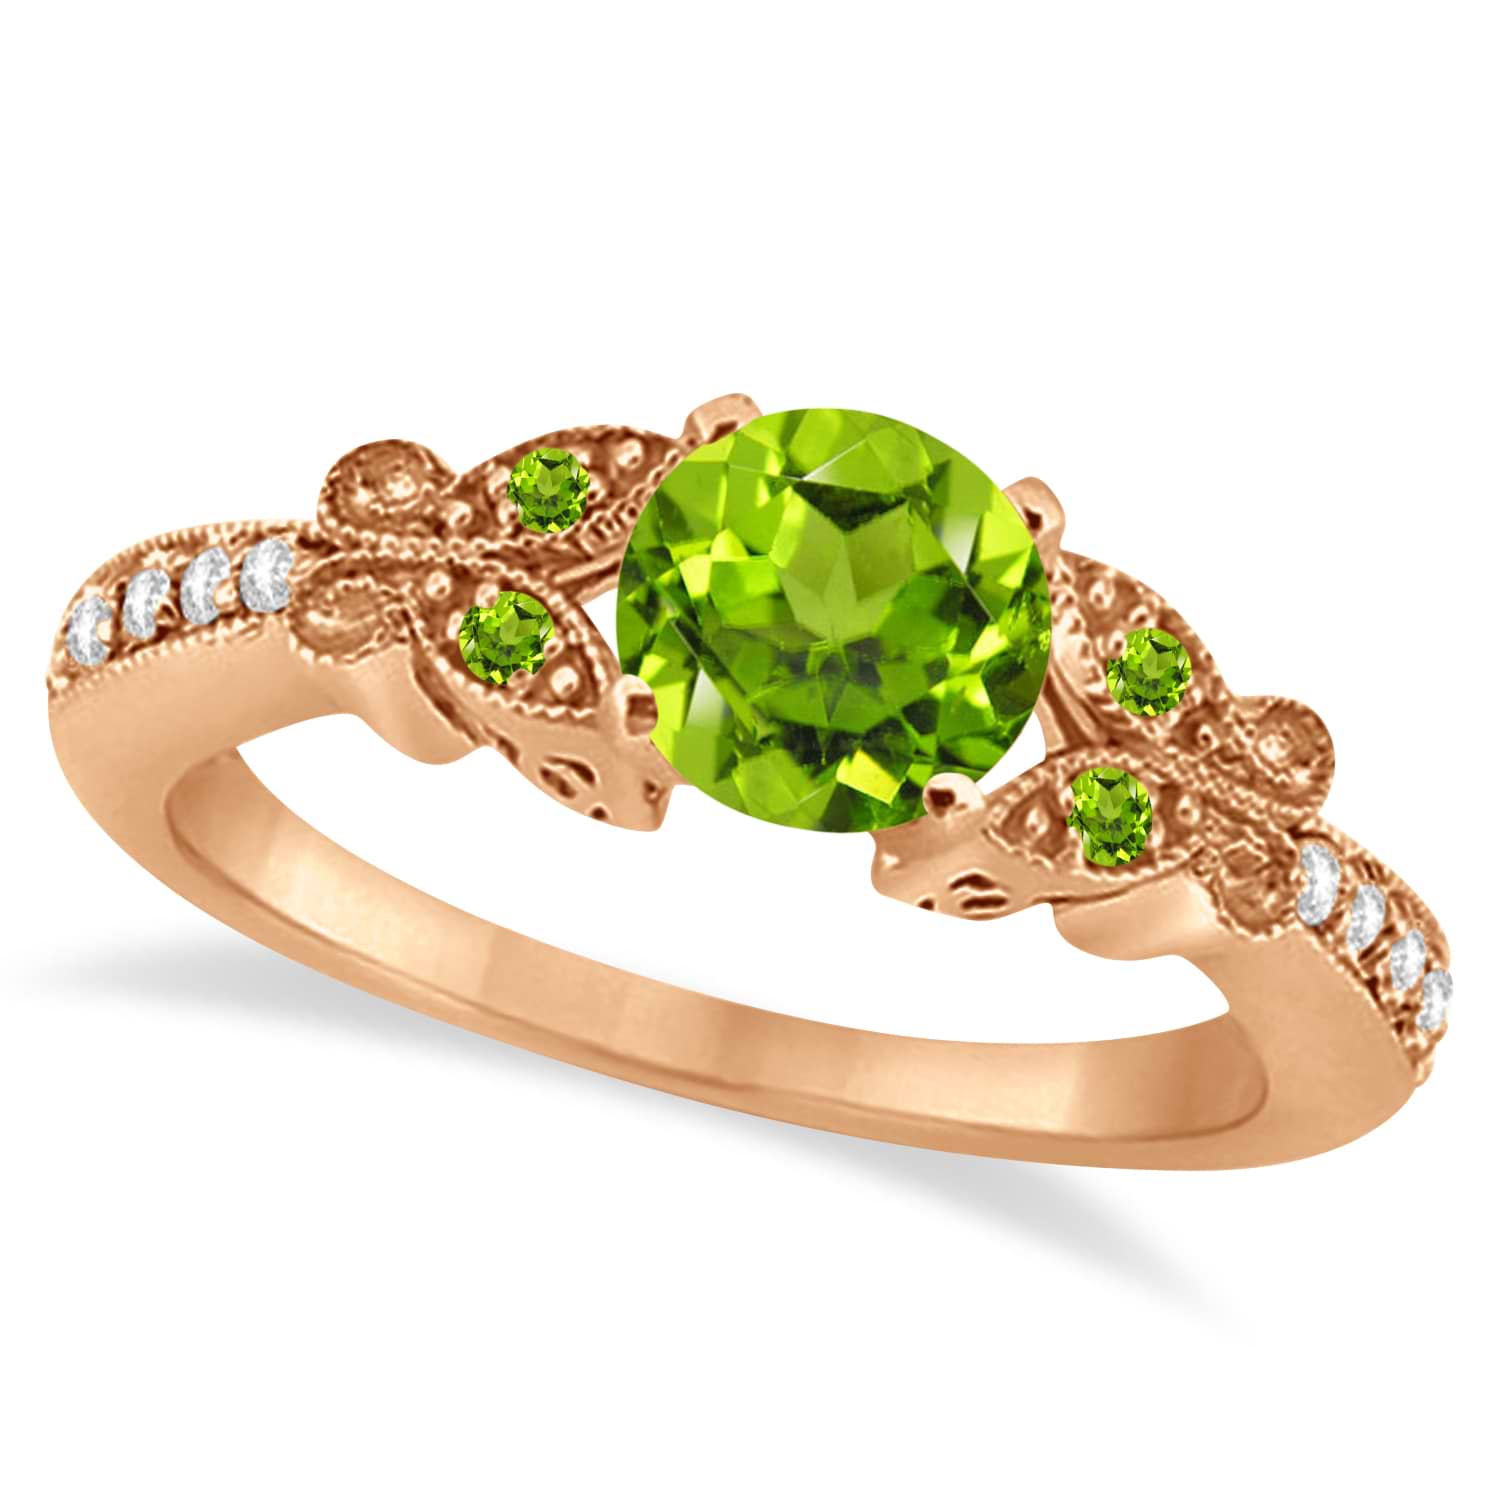 Butterfly Peridot & Diamond Engagement Ring 18K Rose Gold 0.71ctw